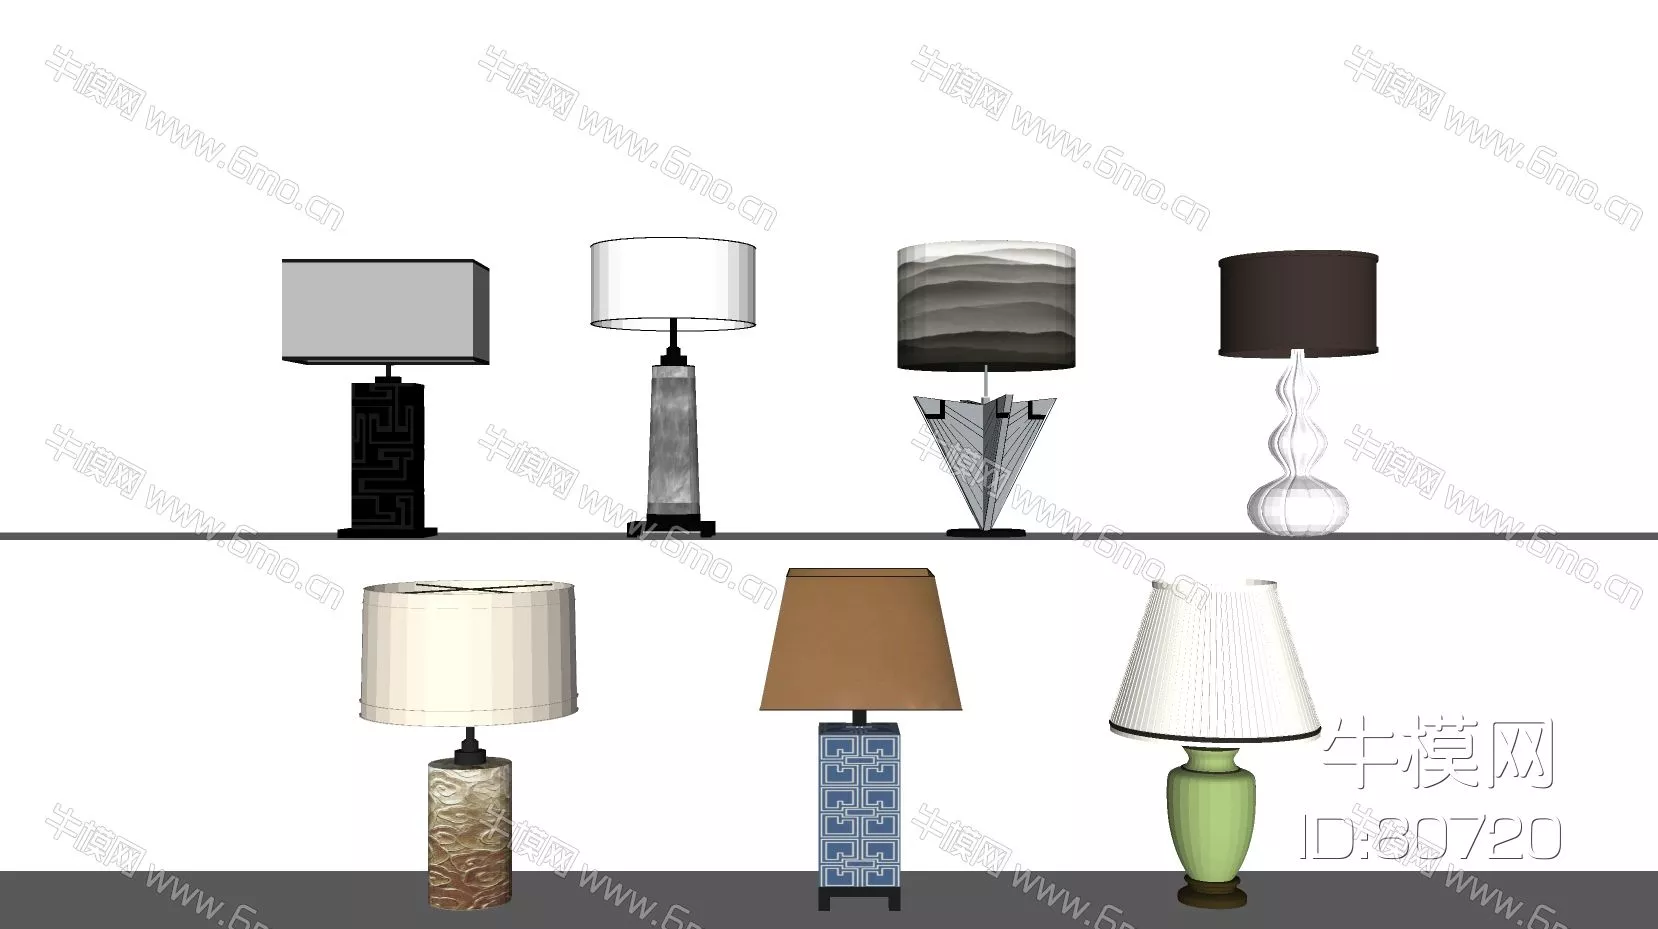 CHINESE TABLE LAMP - SKETCHUP 3D MODEL - ENSCAPE - 80720